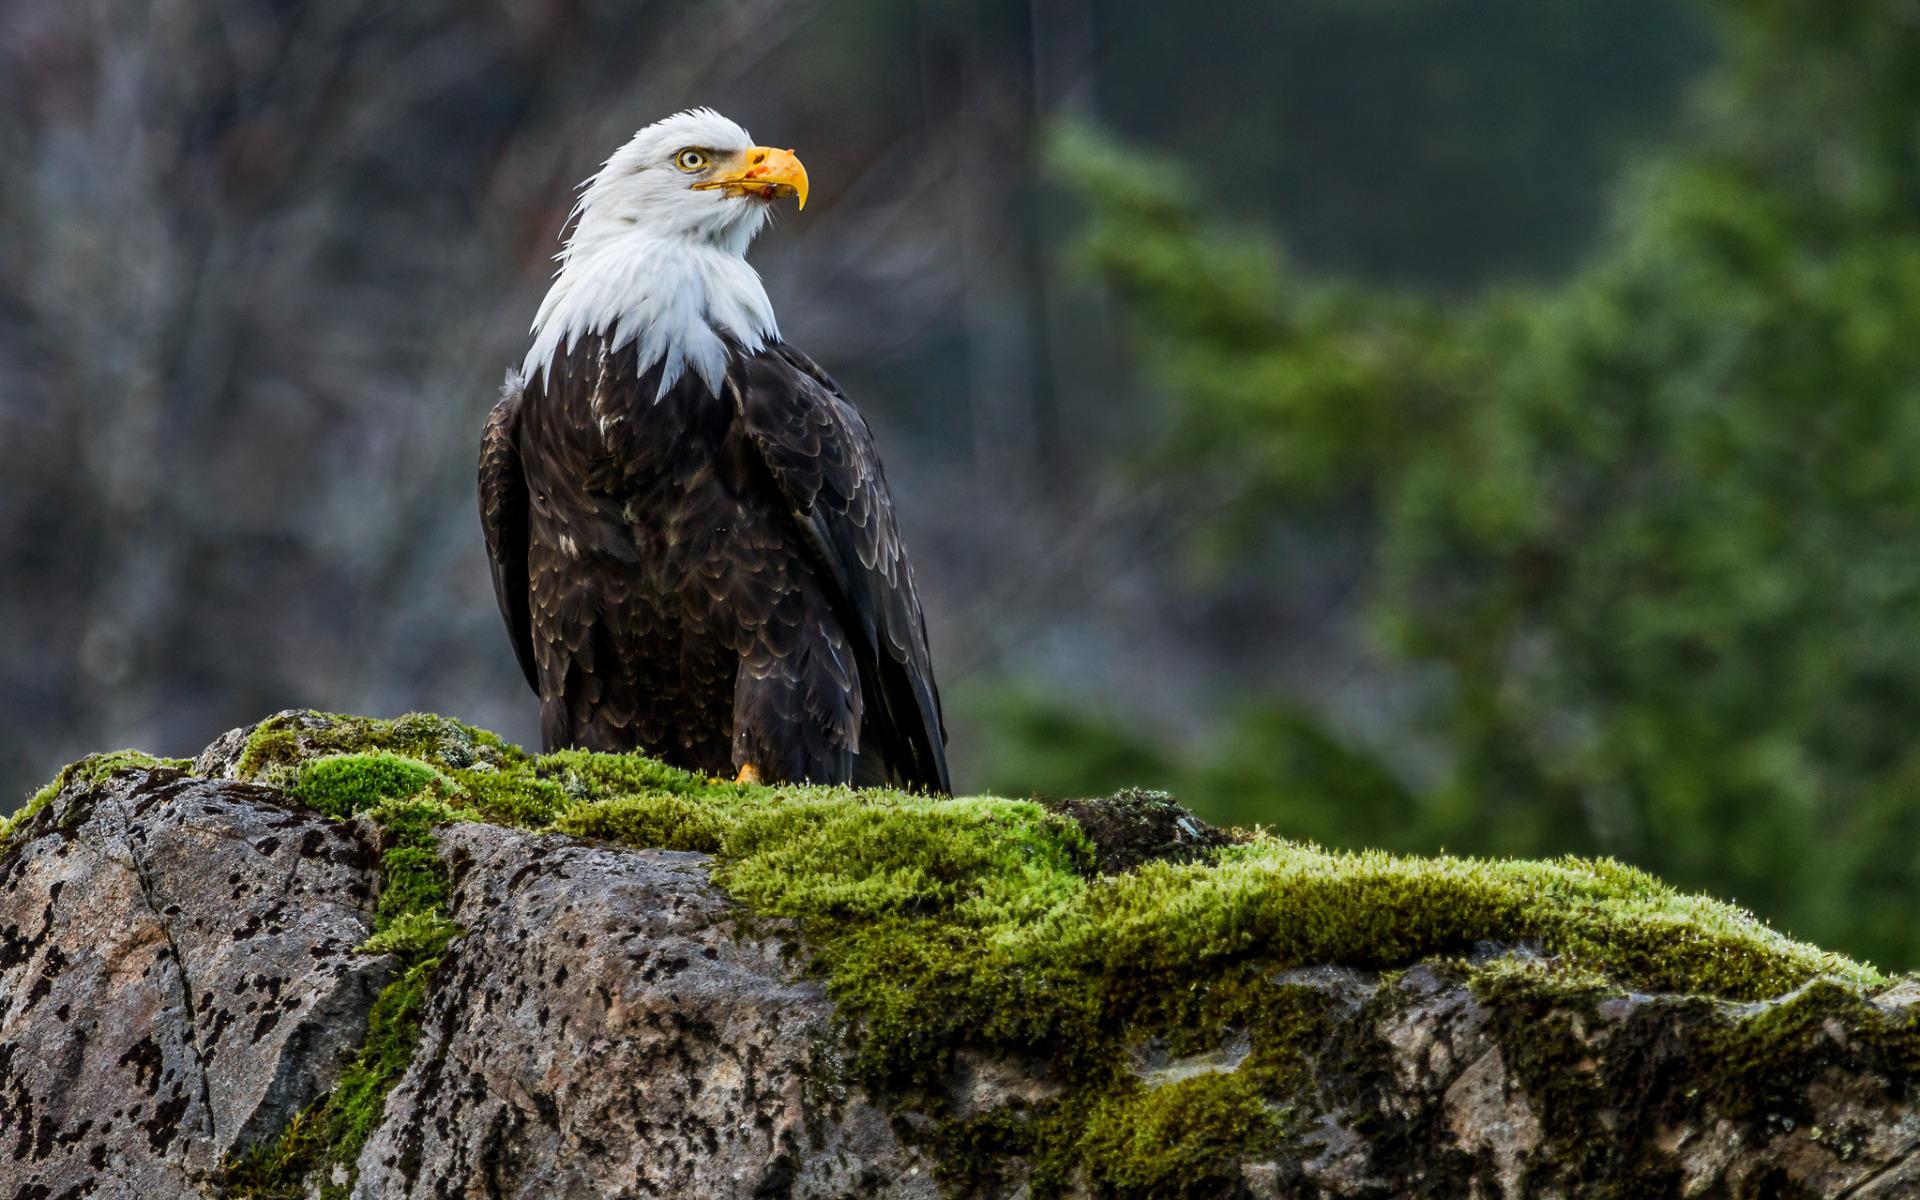 The Bald Eagle High Quality And Resolution Wallpaper On